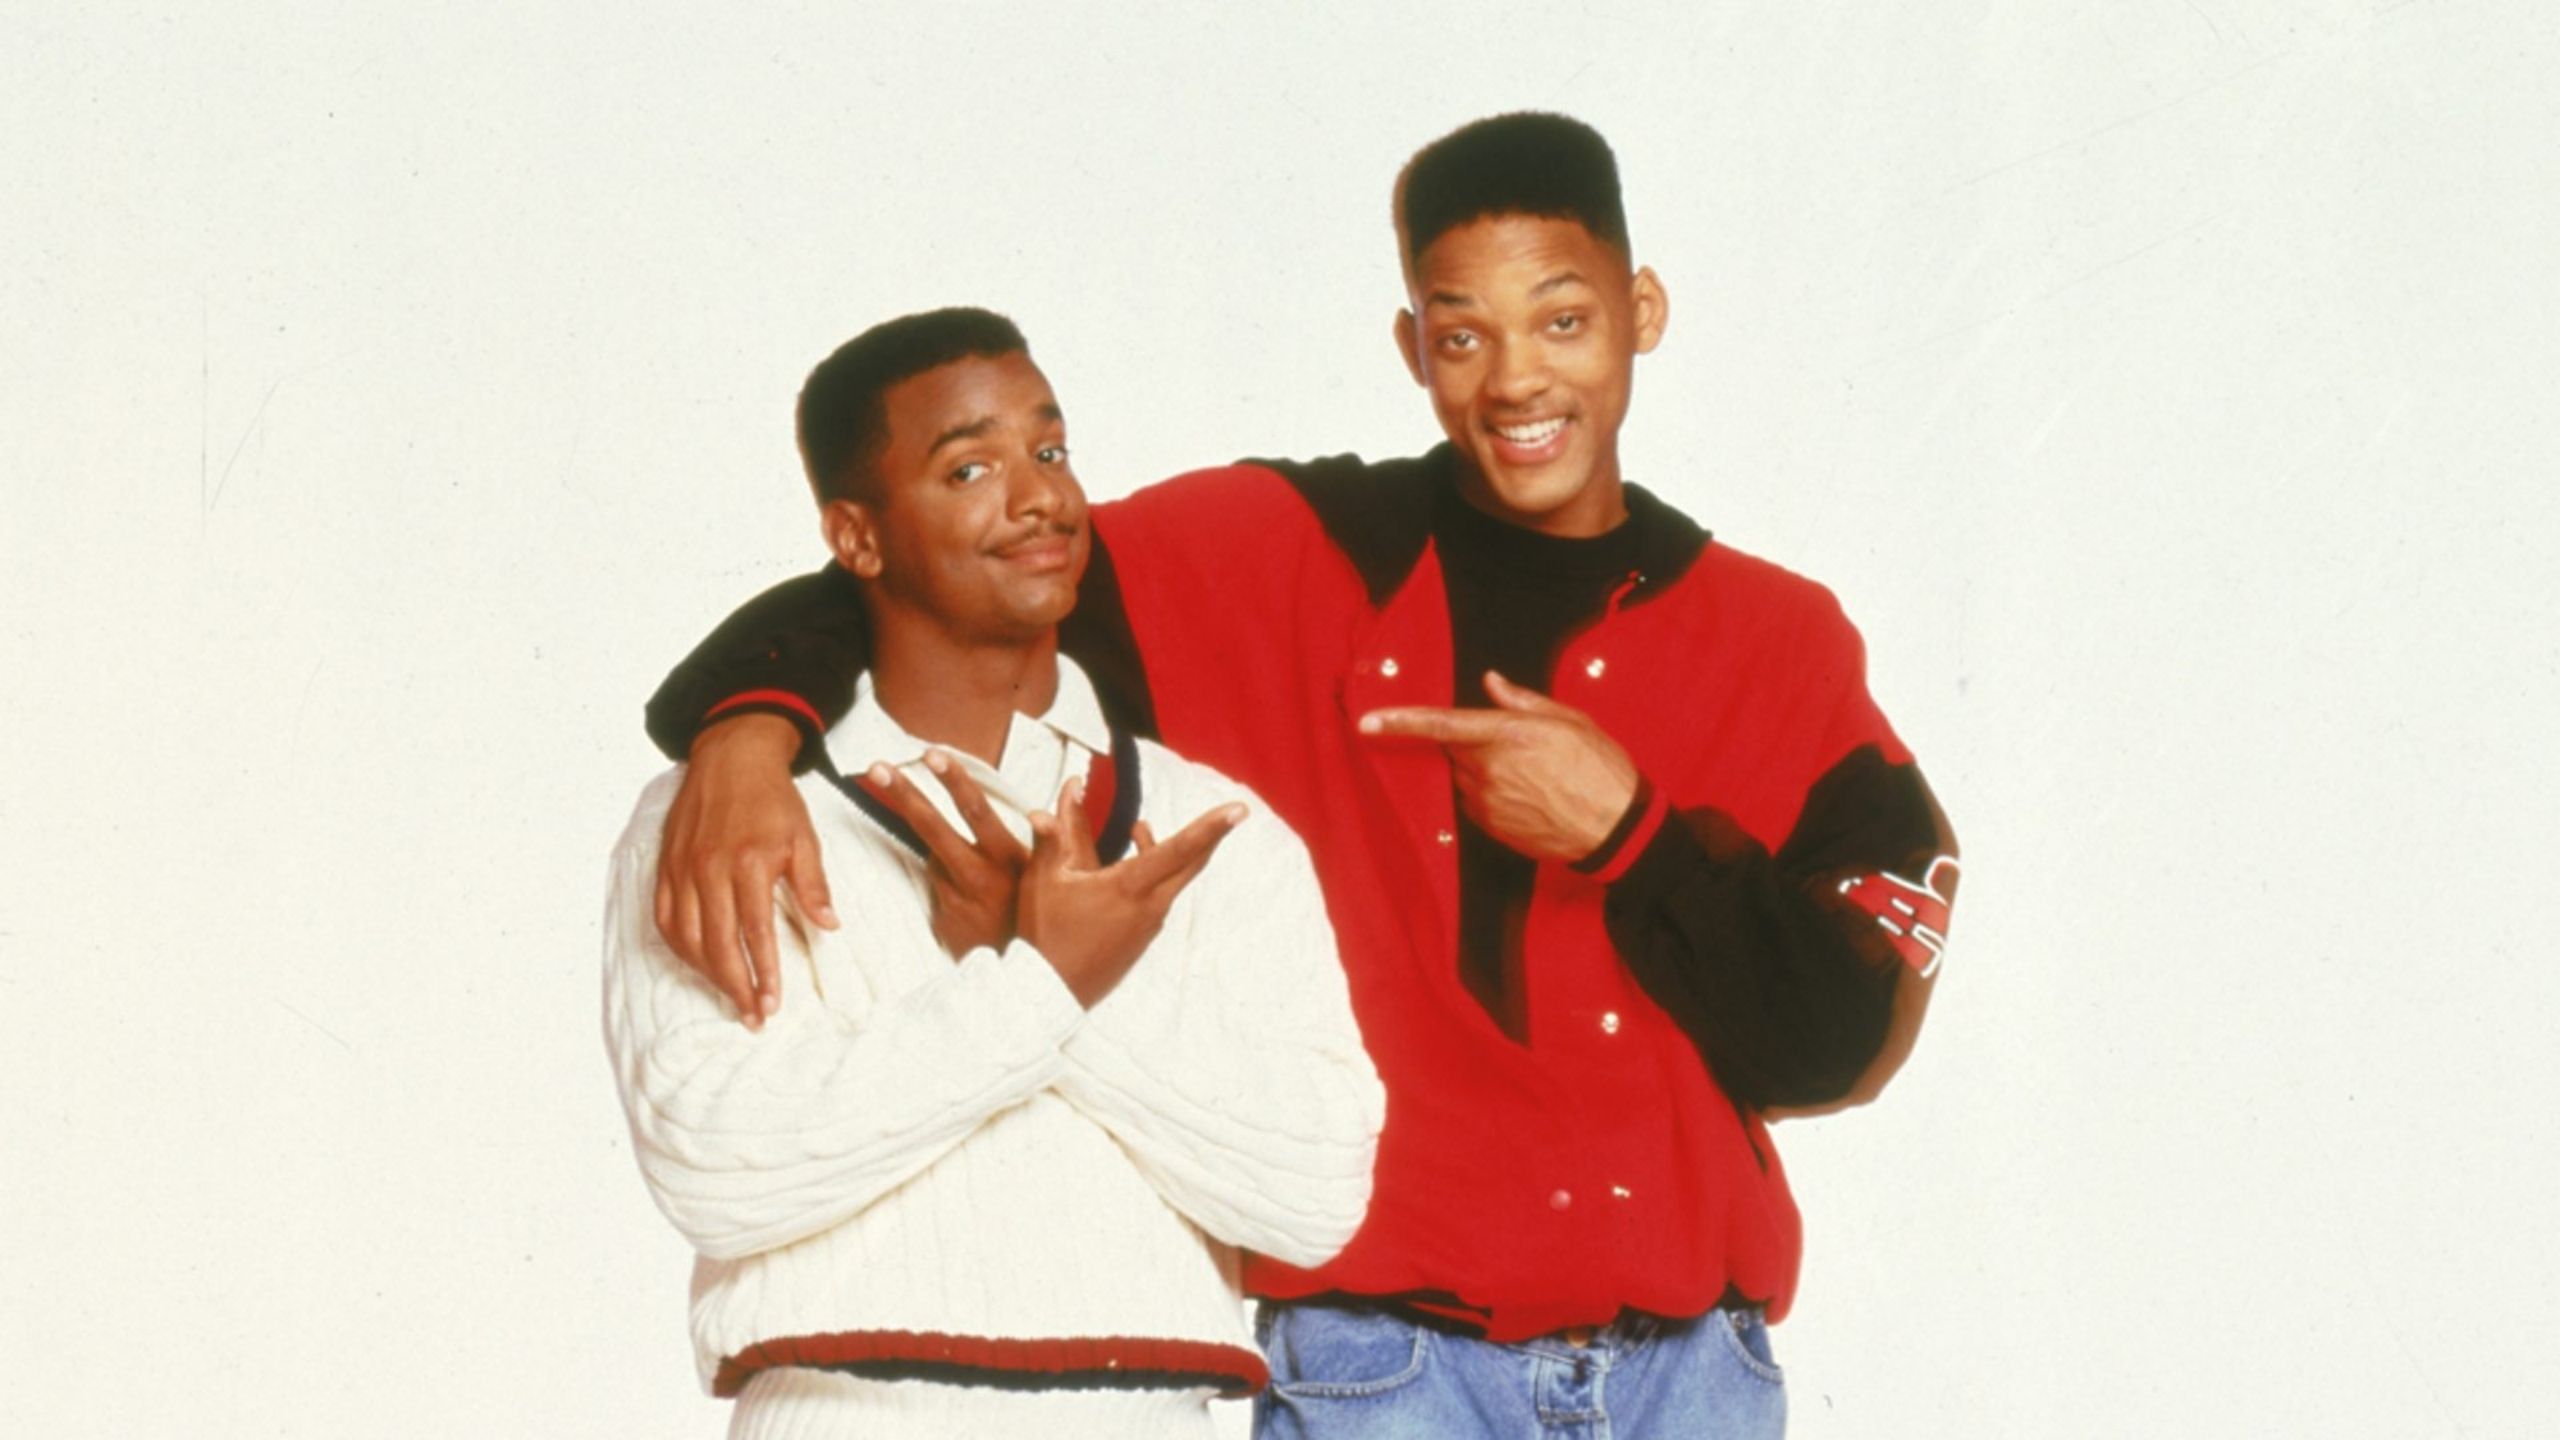 Will Smith in Fresh Prince of Bel Air